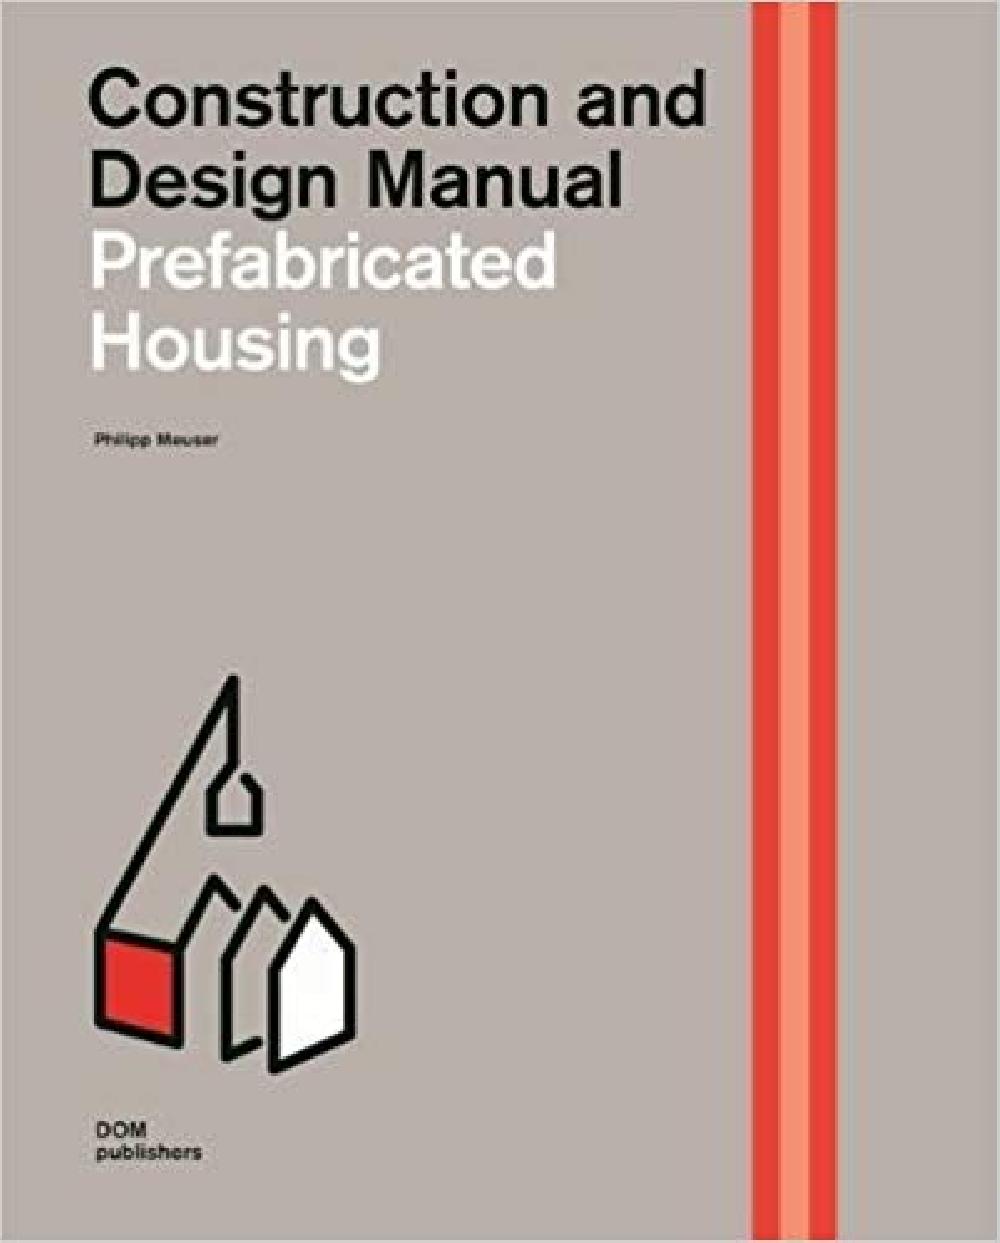 Prefabricated Housing - Construction and Design Manual